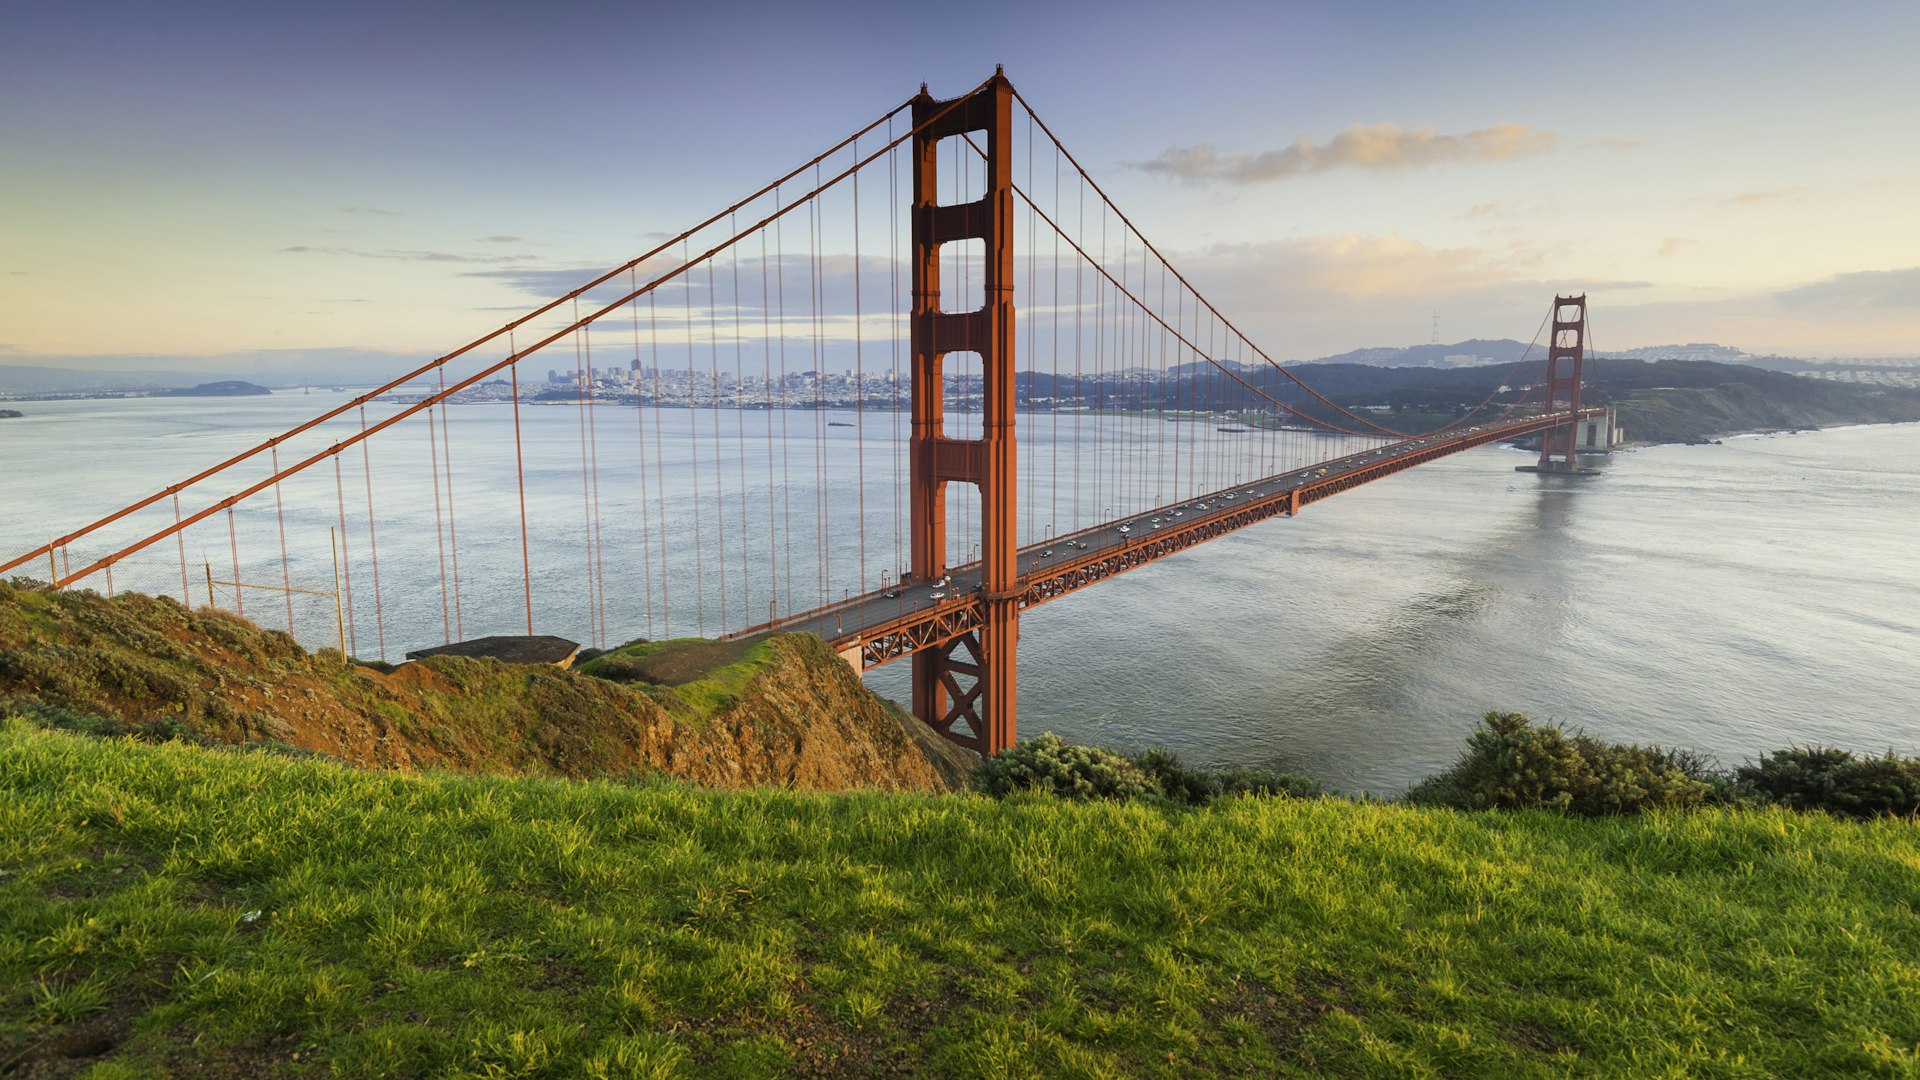 The Golden Gate Bridge as seen from the Marin County Headlands on a sunny clear day, with bright green grass in the foreground